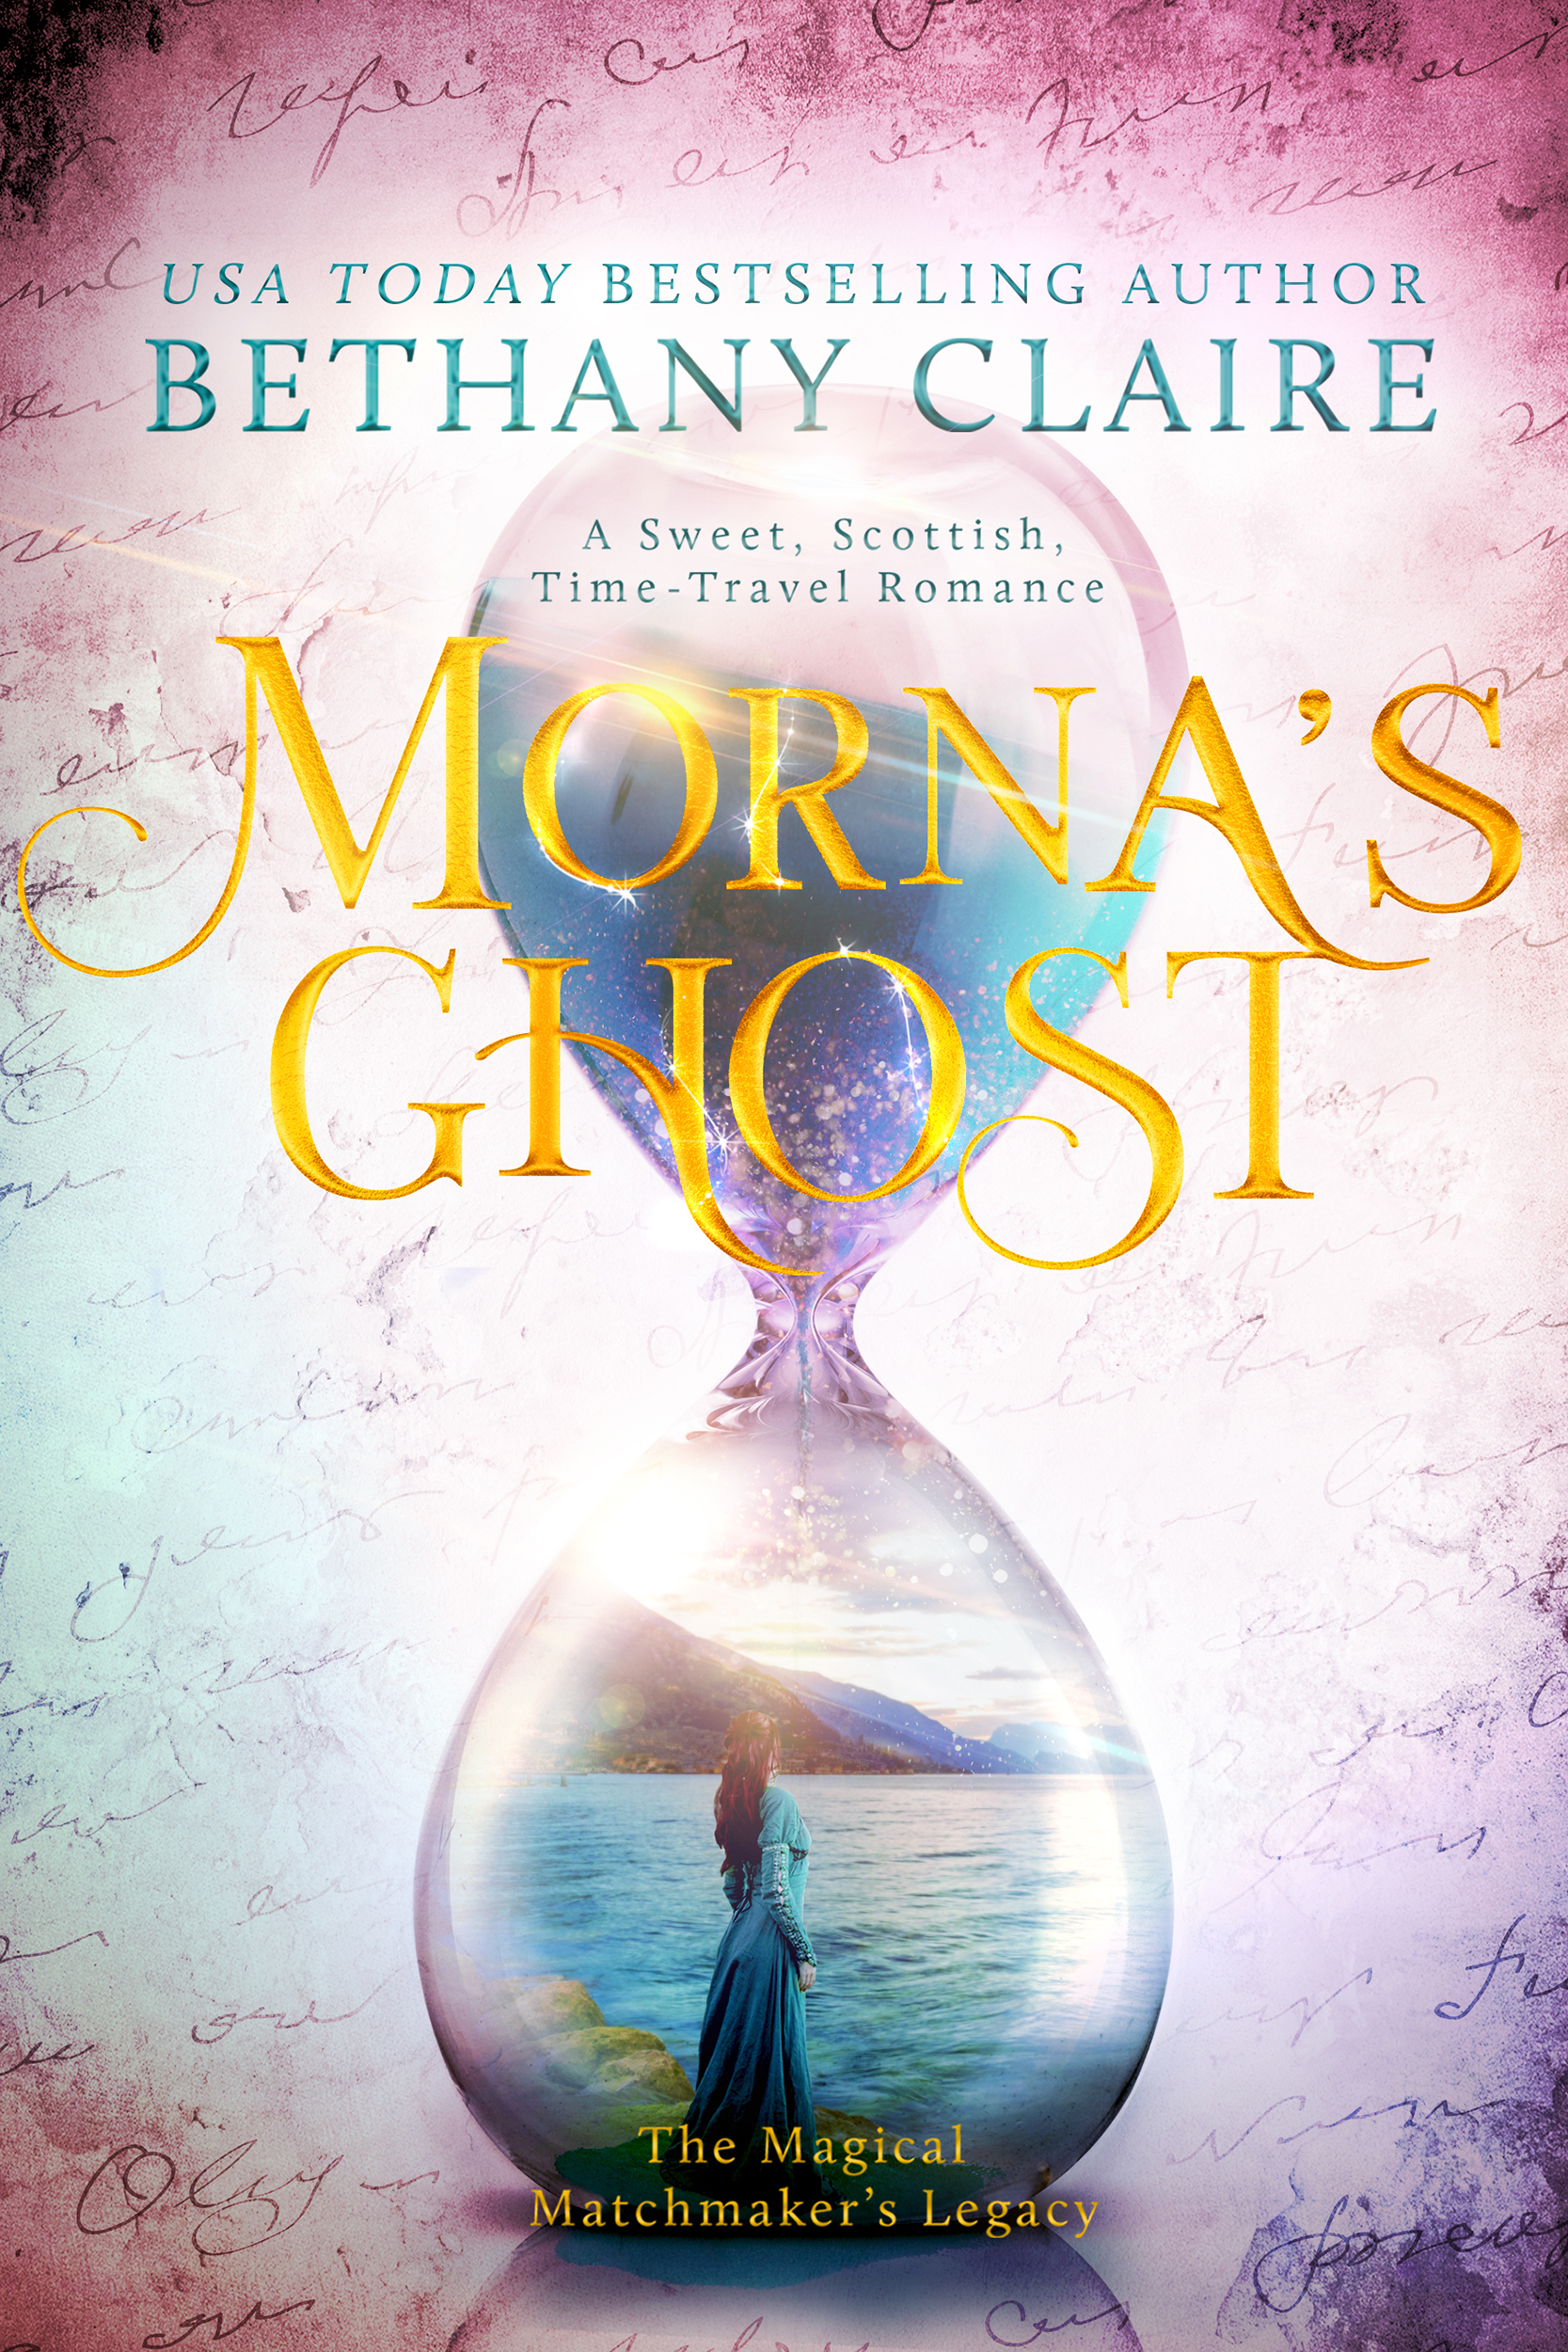 Morna's Ghost by Bethany Claire